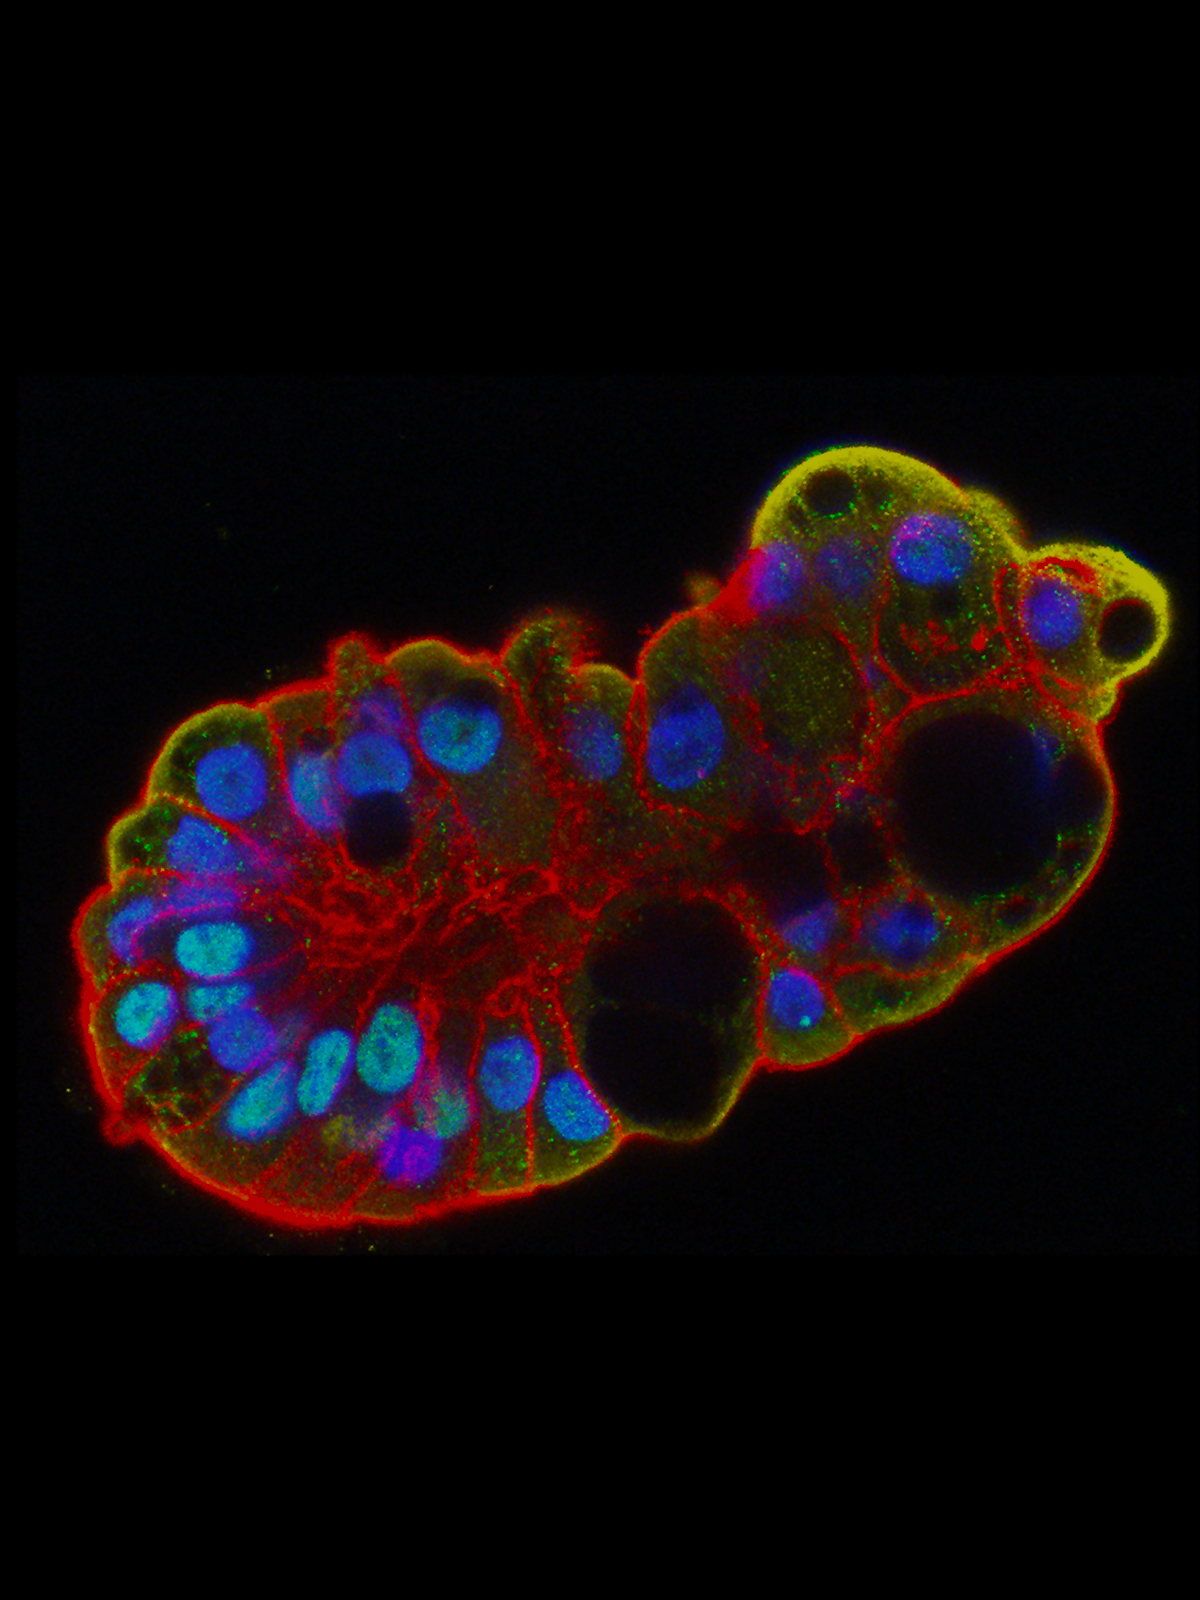 Main page slider image of the lung organoid.